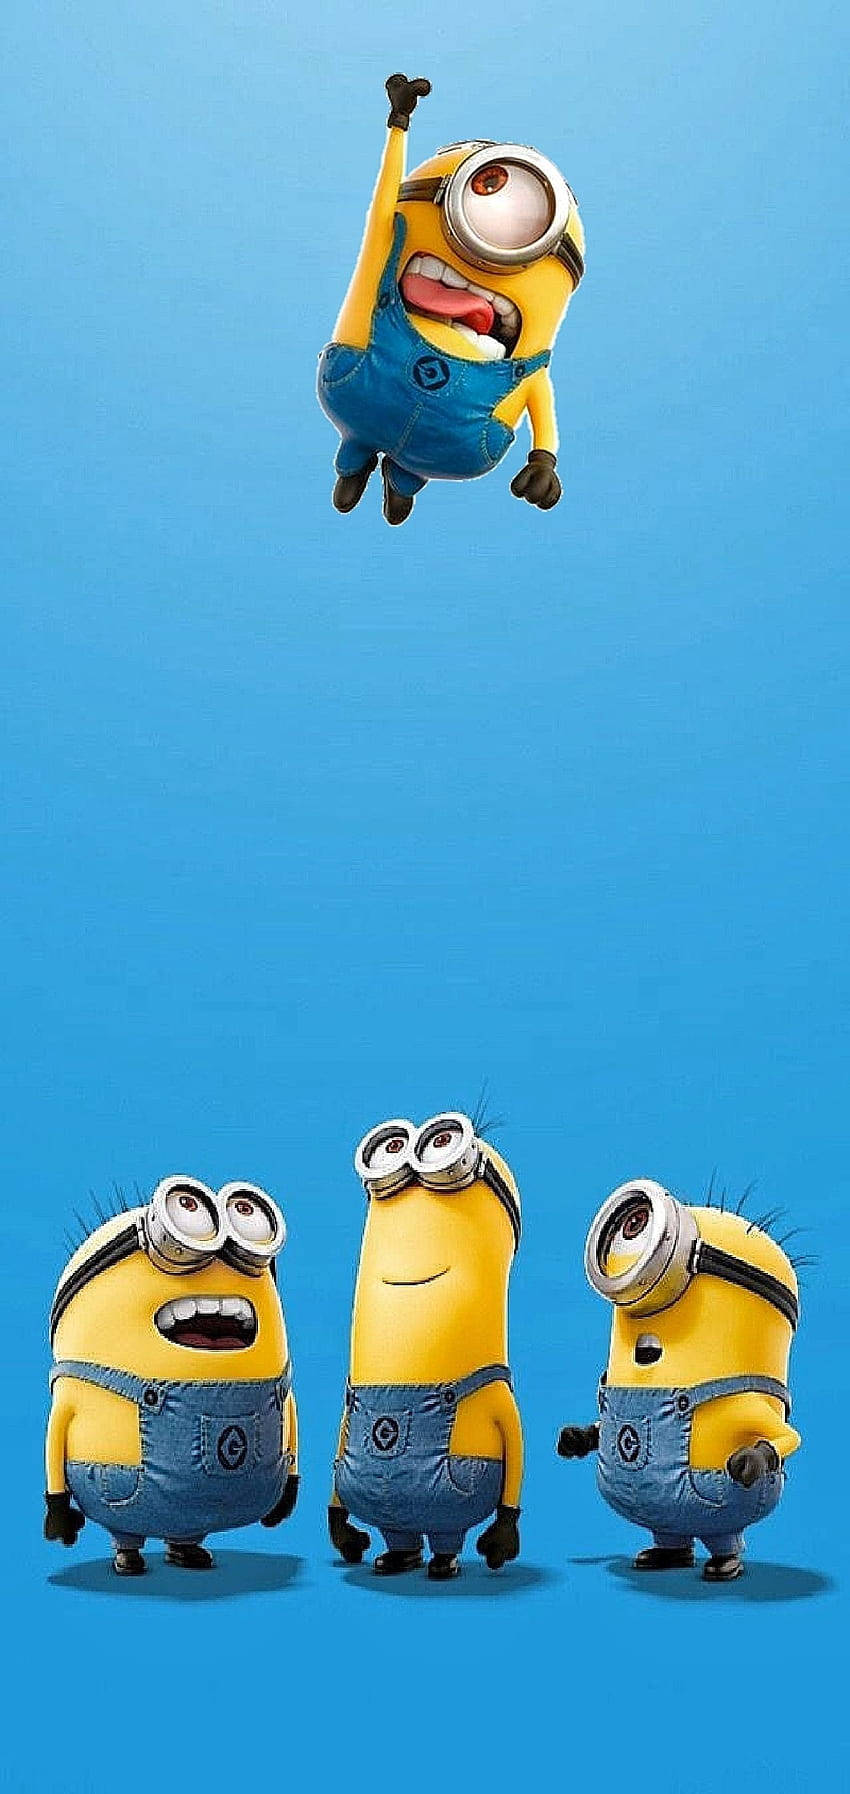 Stay Connected with Minion Phone Wallpaper